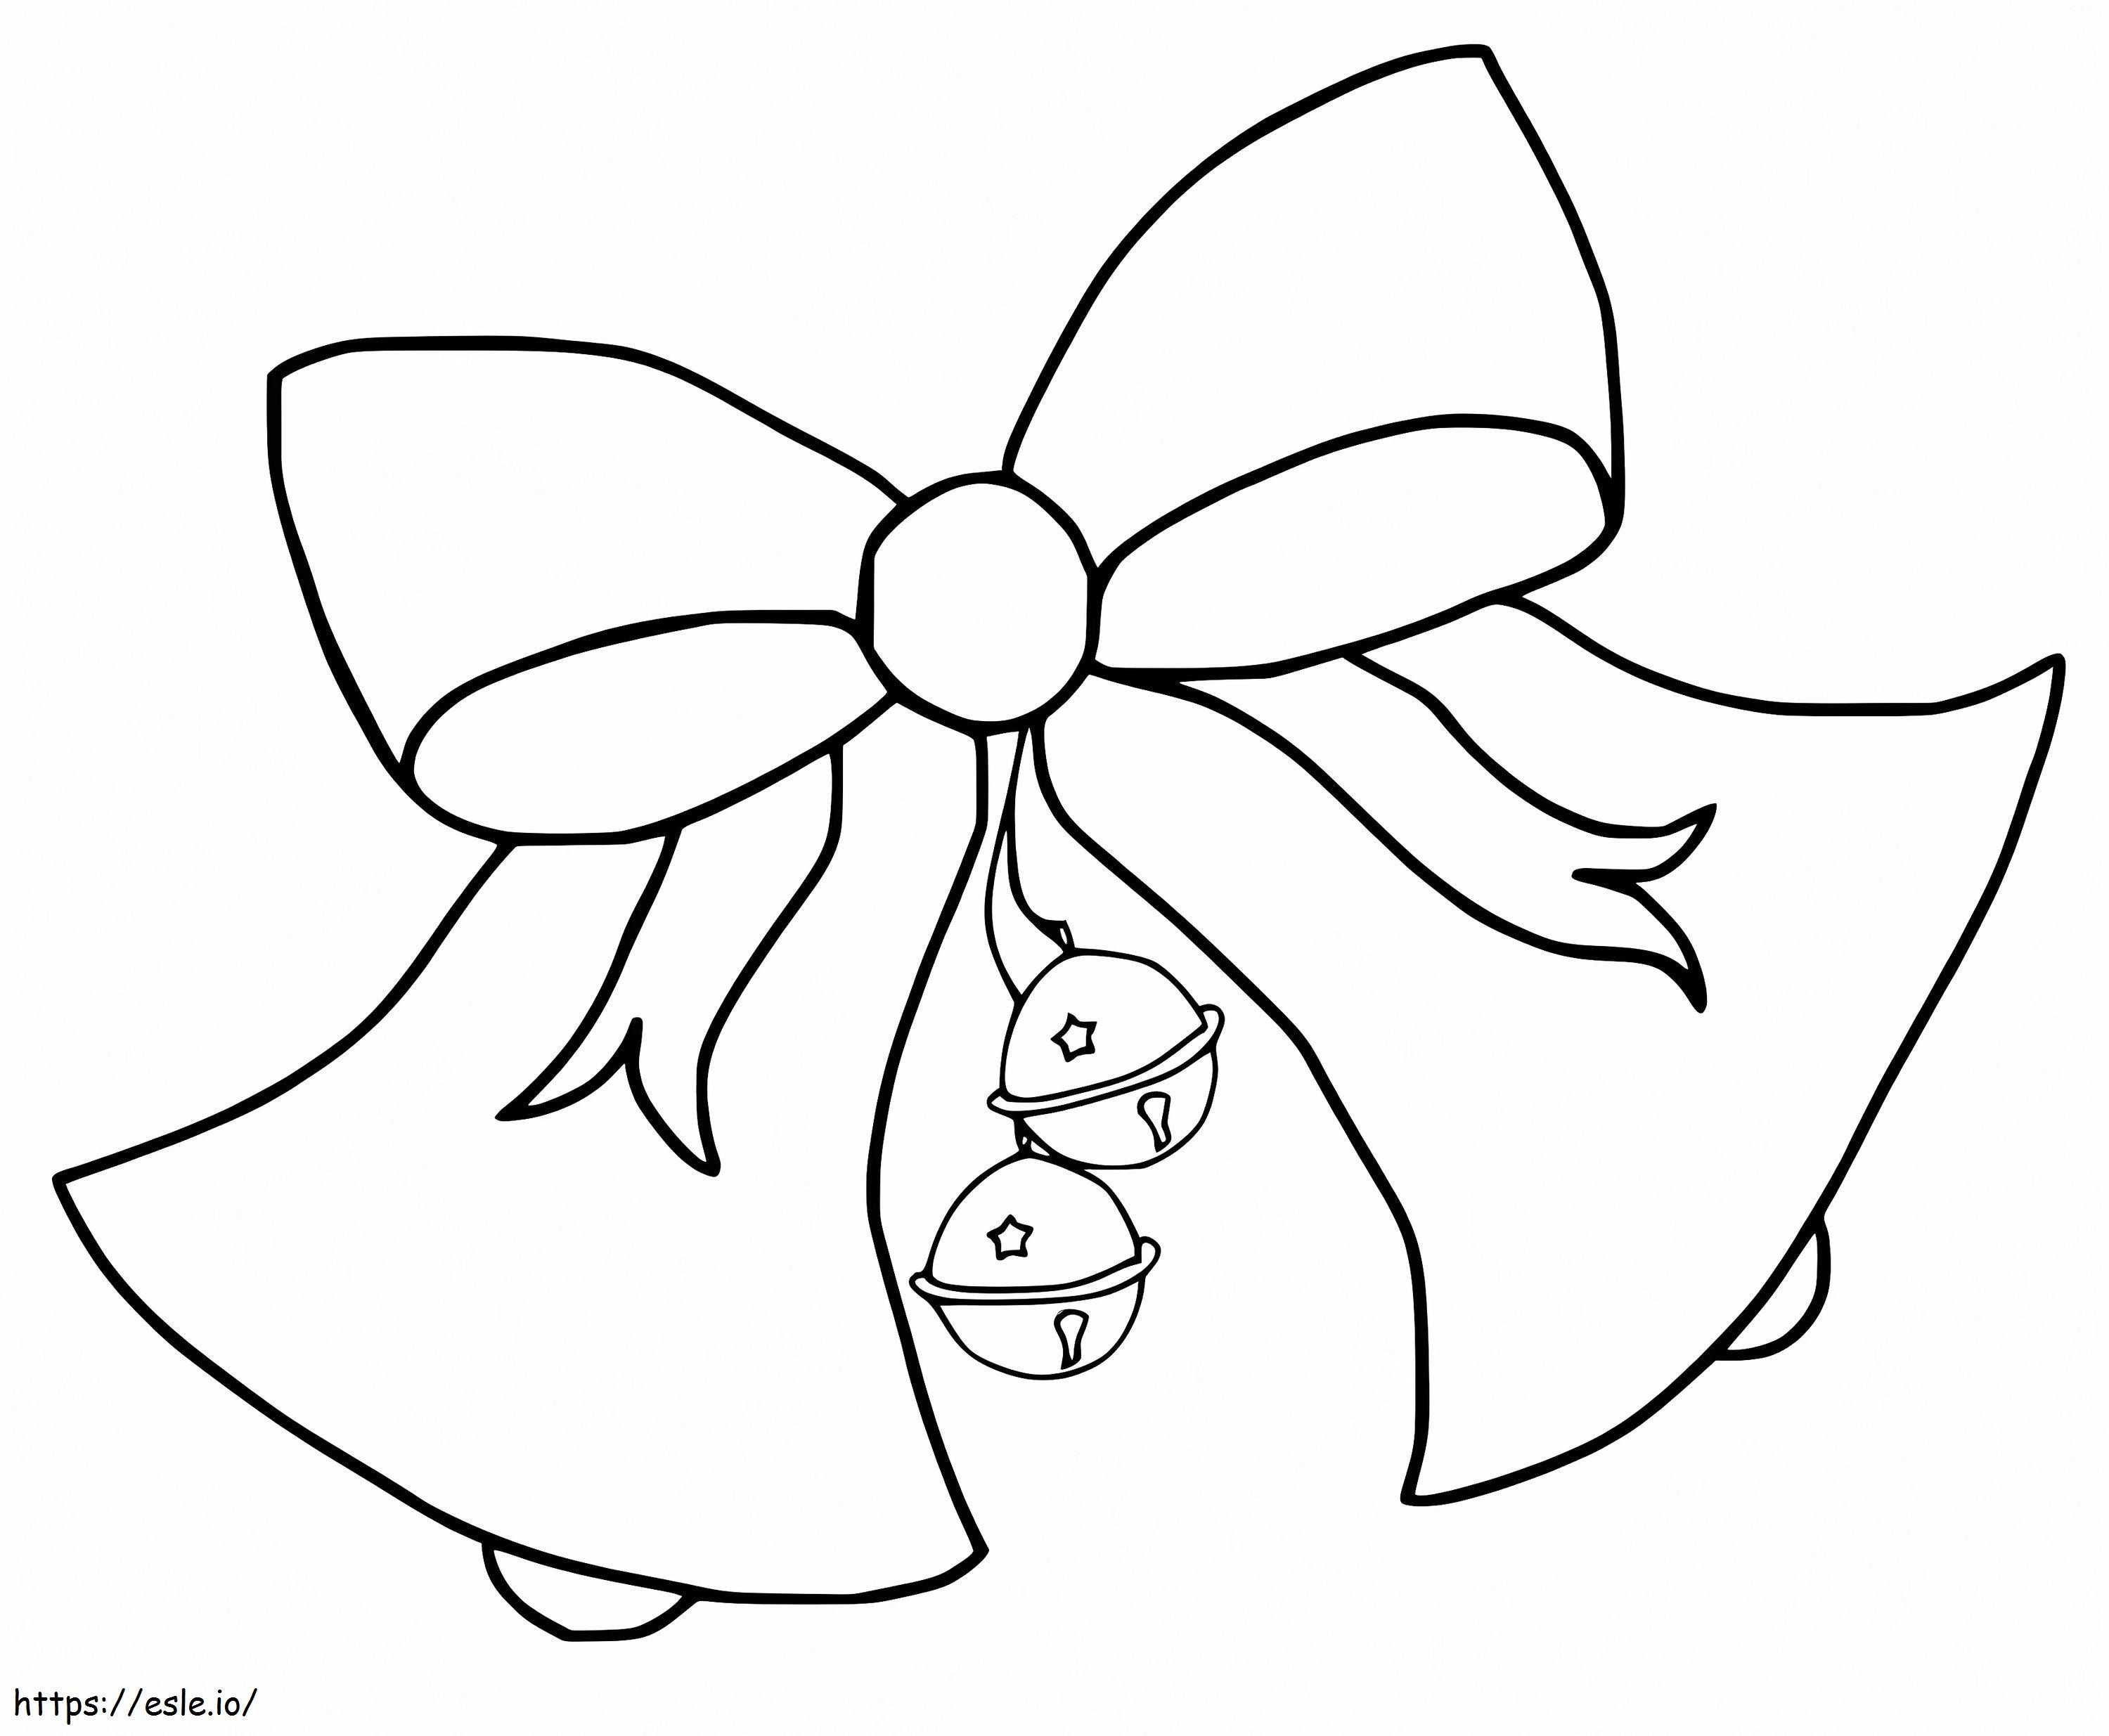 Christmas Bells 3 coloring page